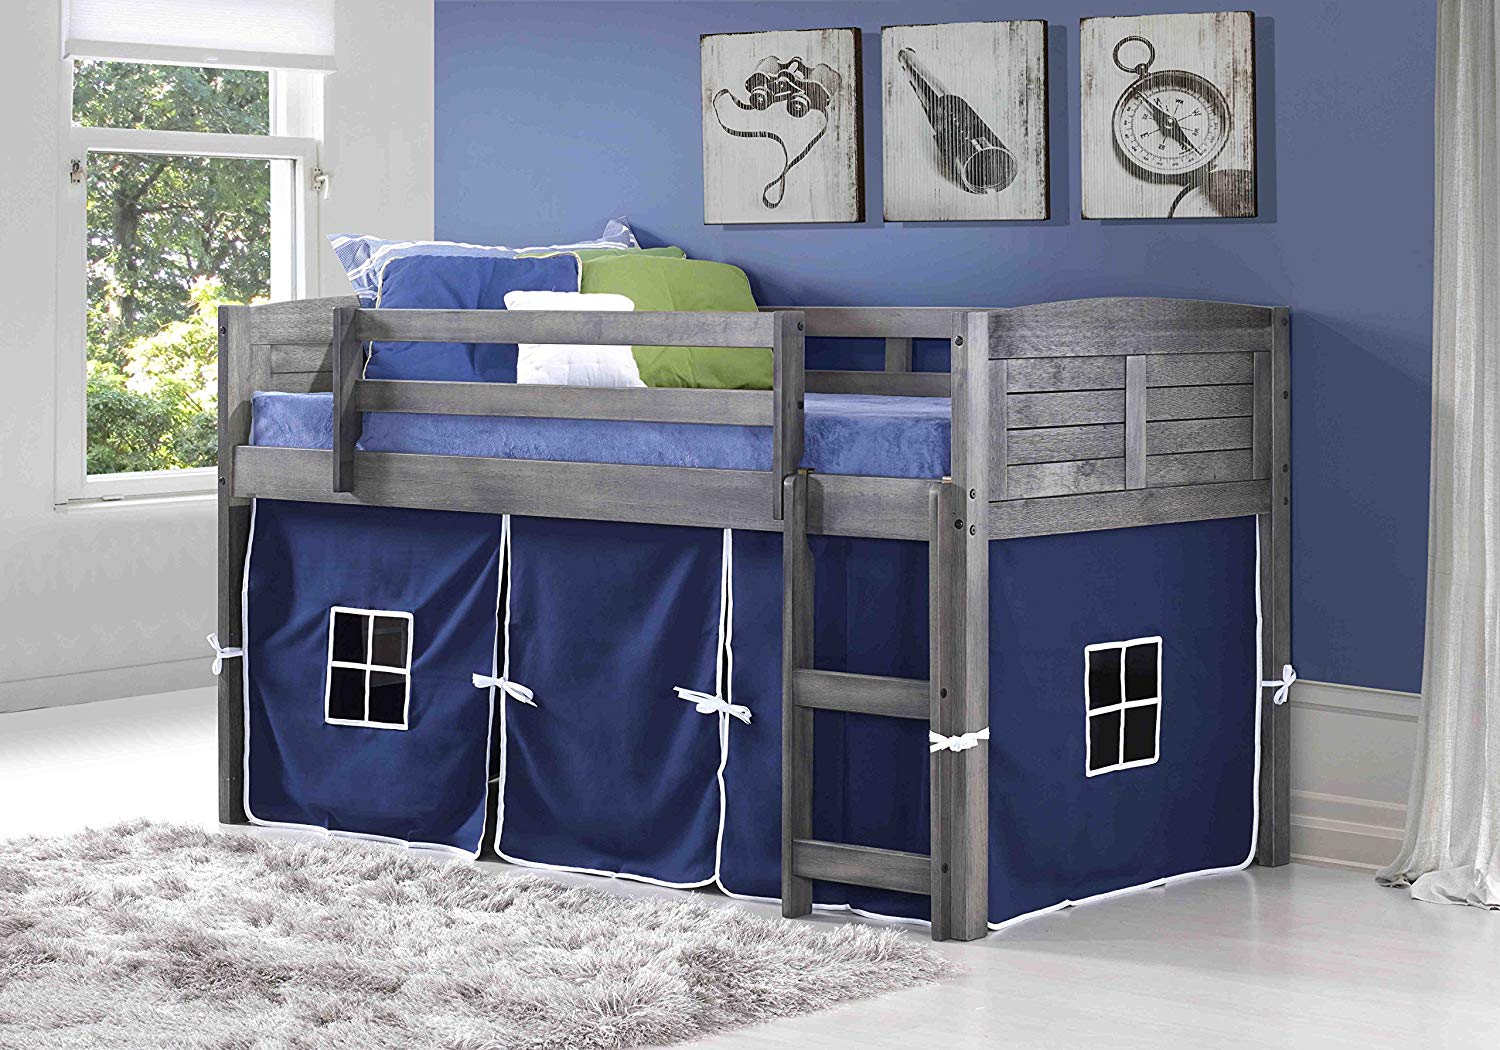 Discount twin loft bed by Donco Kid